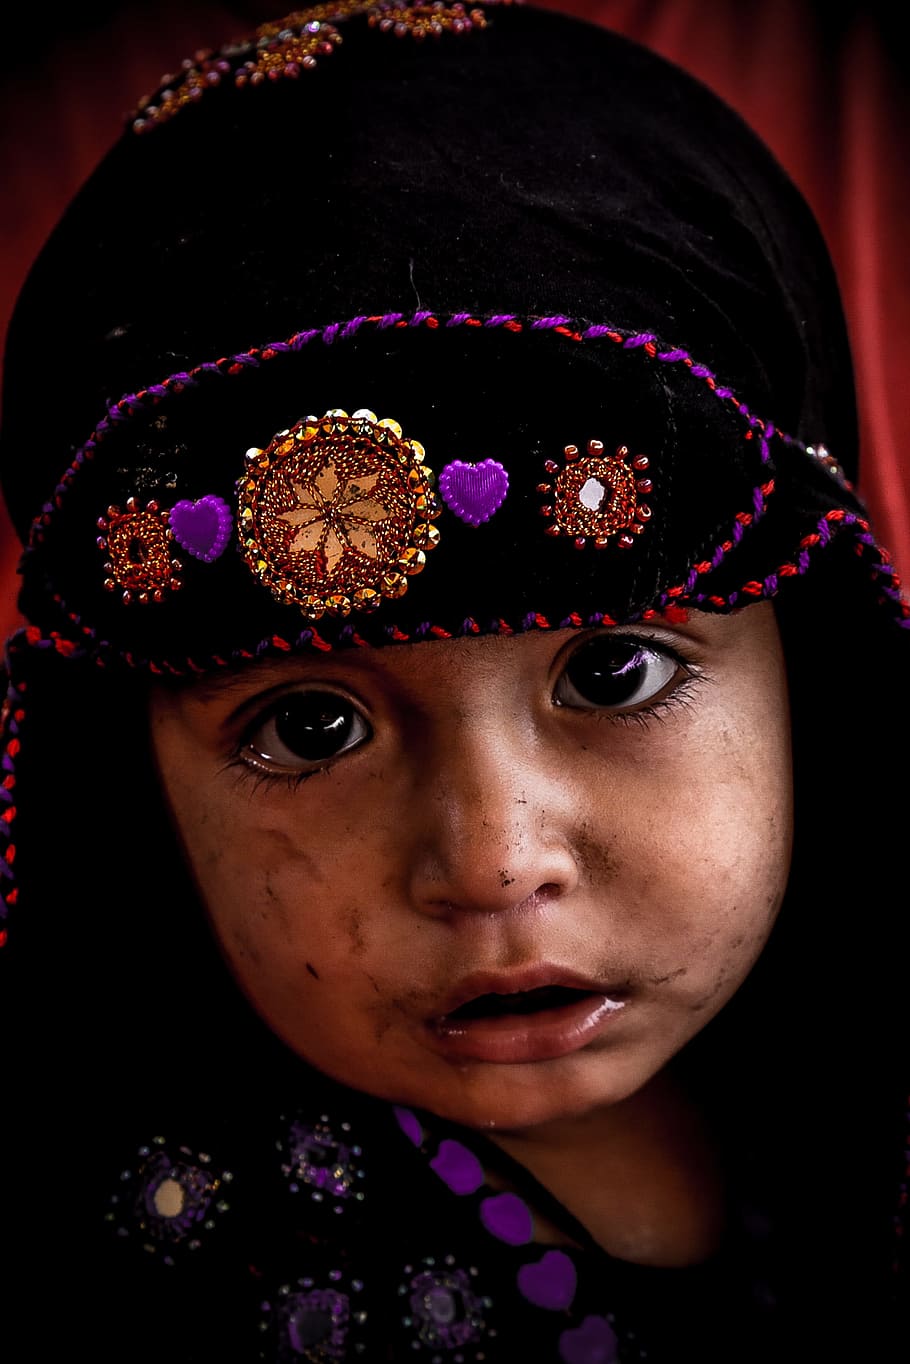 child, afghan, refugee, kid, baby, face, happiness, cute, people, sweet